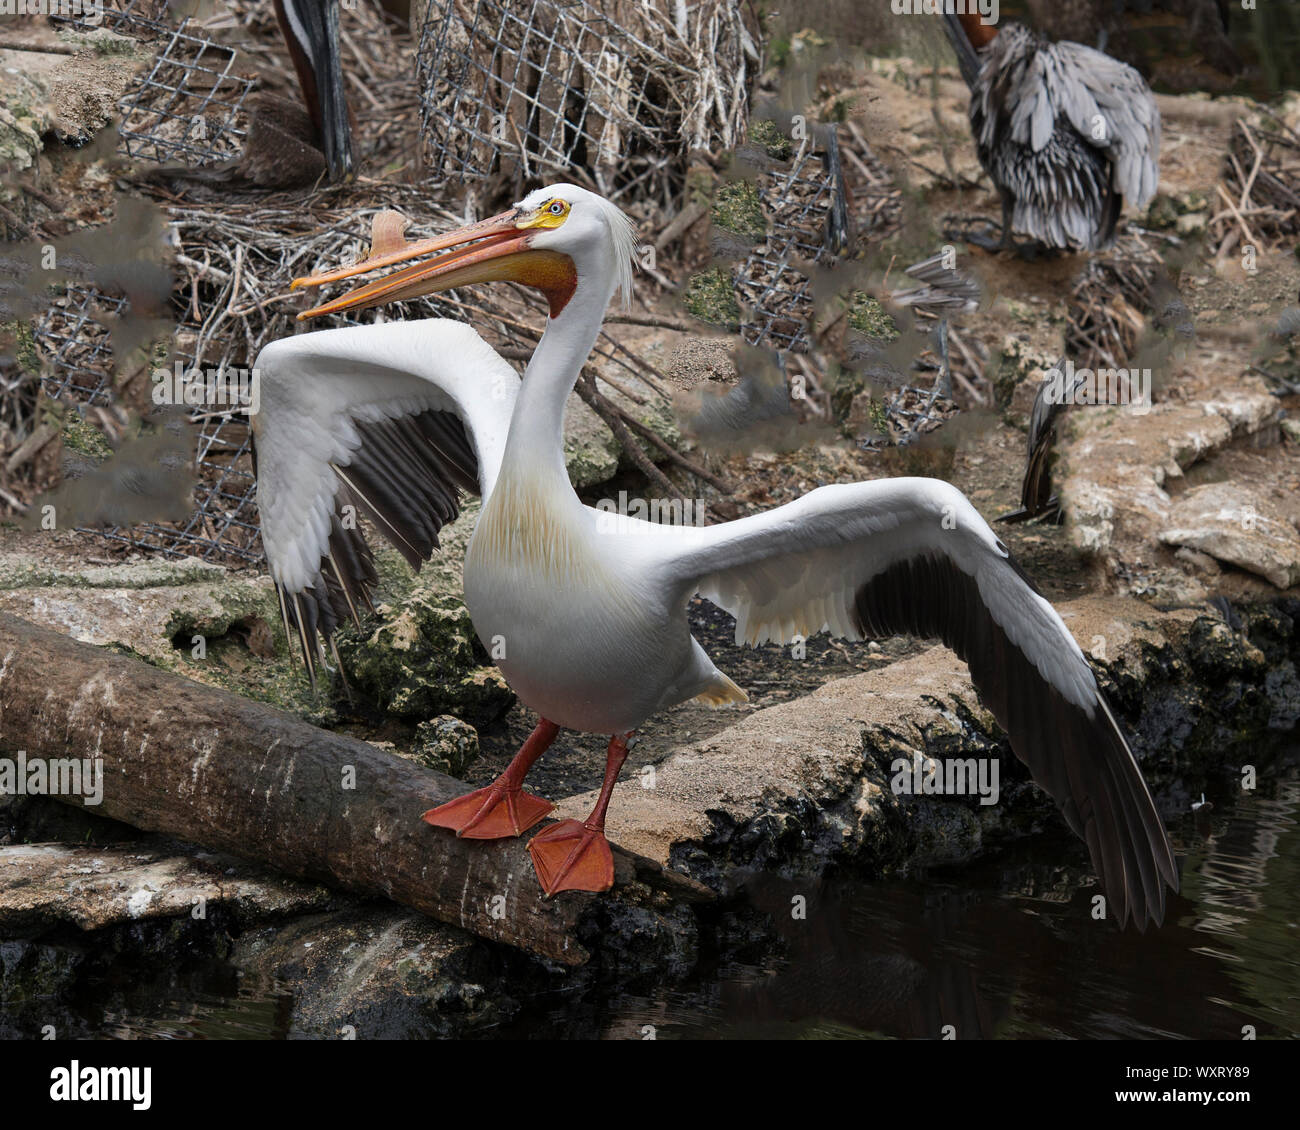 White Pelican bird with its spread wings perch on a log and enjoying its environment and surrounding. Stock Photo